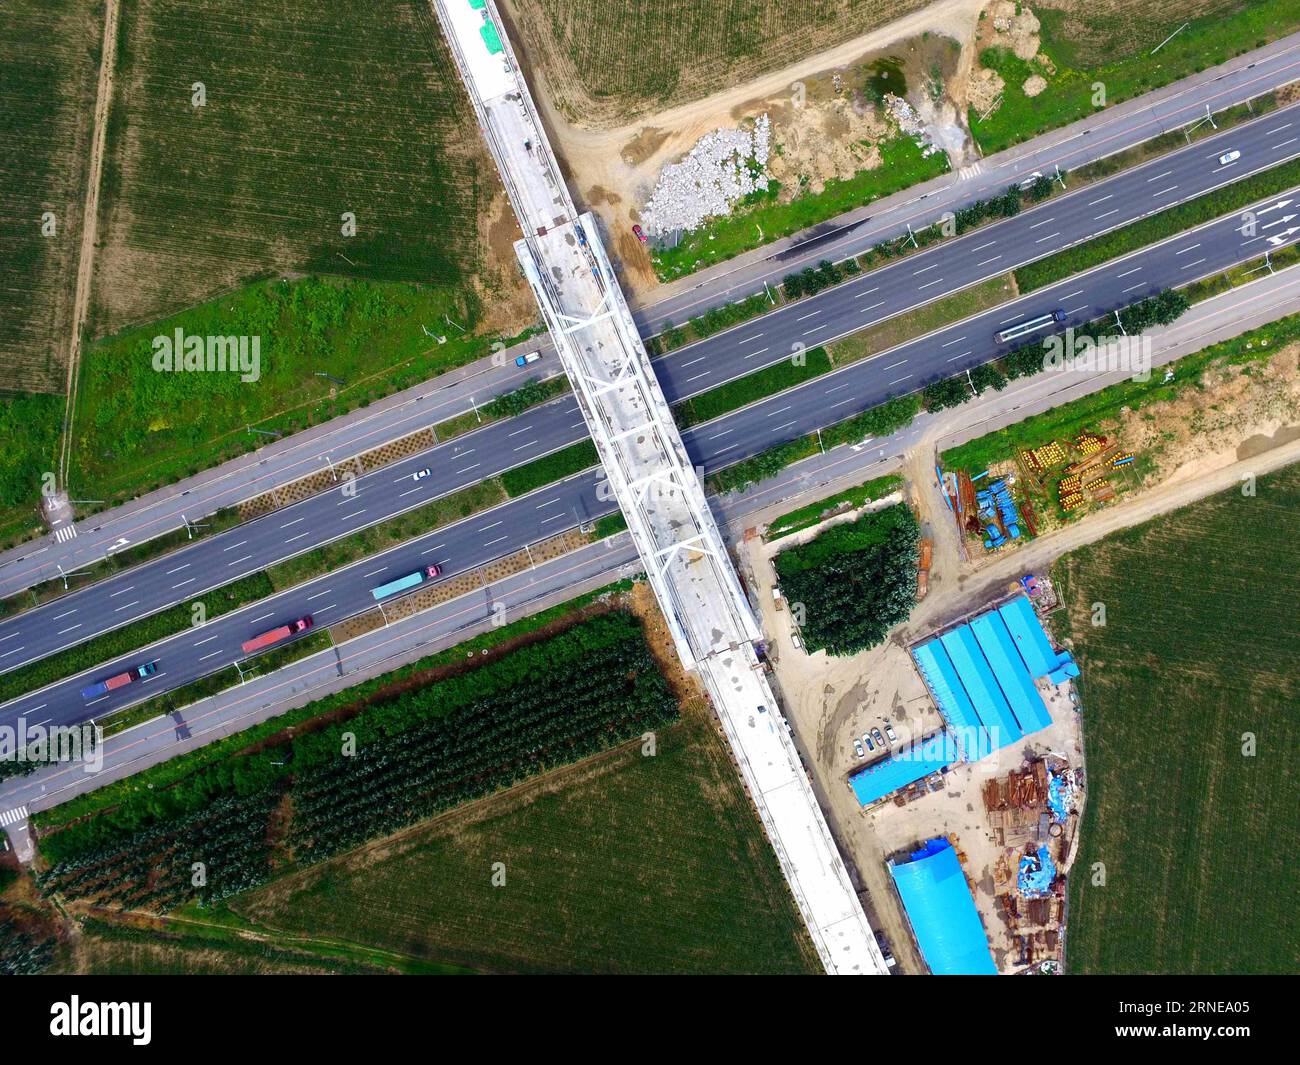 (160615) -- SHENYANG, June 15, 2016 -- Photo taken on June 15, 2016 shows the Puhe River Bridge of Liaoning section of Beijing-Shenyang high-speed railway in northeast China s Liaoning Province. The 700-kilometer-long railway line, with a designed speed of 350 km per hour, is expected to be put into operation in 2019. The construction work of the line s Liaoning section has entered track-related phase. )(mcg) CHINA-BEIJING-SHENYANG-HIGH-SPEED RAILWAY-CONSTRUCTION (CN) XingxGuangli PUBLICATIONxNOTxINxCHN   160615 Shenyang June 15 2016 Photo Taken ON June 15 2016 Shows The  River Bridge of Liaon Stock Photo